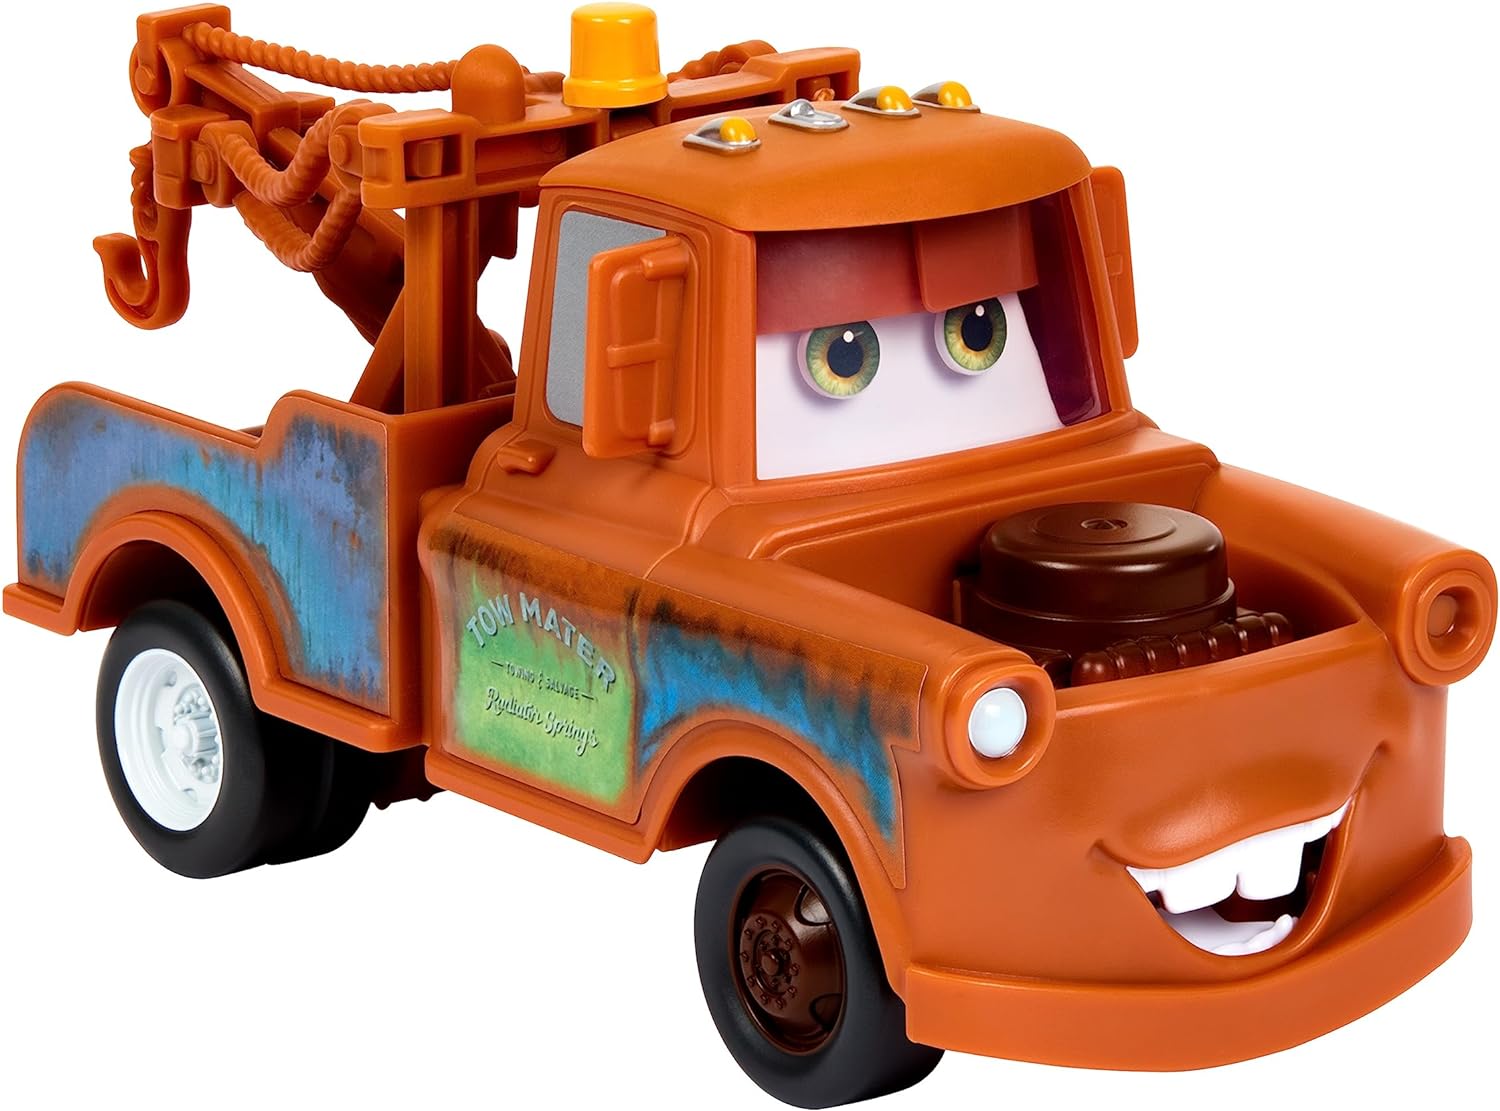 Mattel Disney Pixar Cars Toy Cars & Trucks, Moving Moments Mater Vehicle with Moving Eyes & Mouth (Amazon Exclusive)